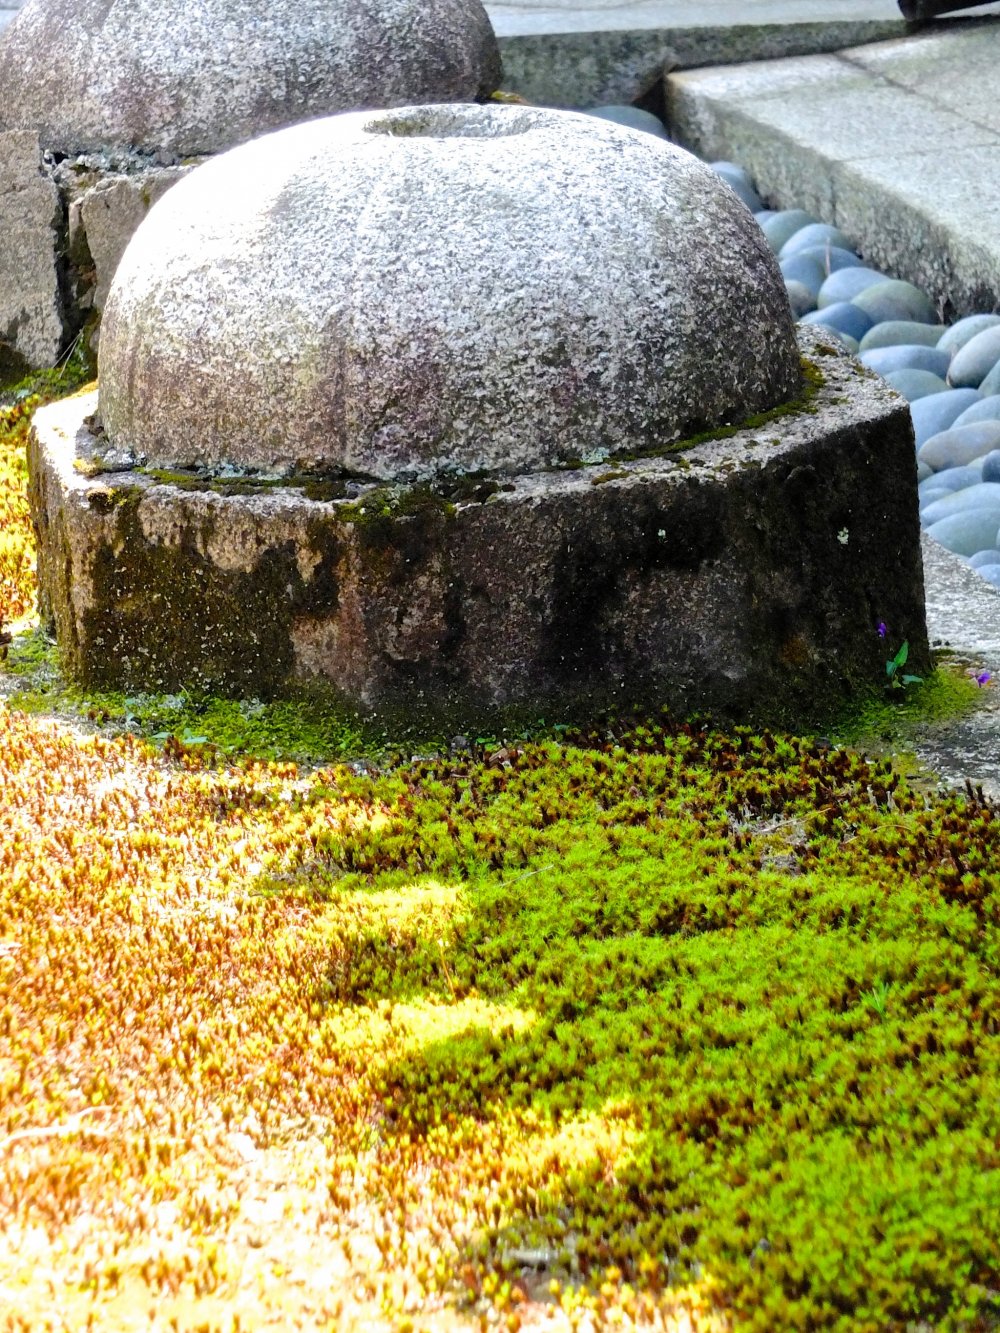 Not sure what it is, but the combination of moss and stone and shadow was magical